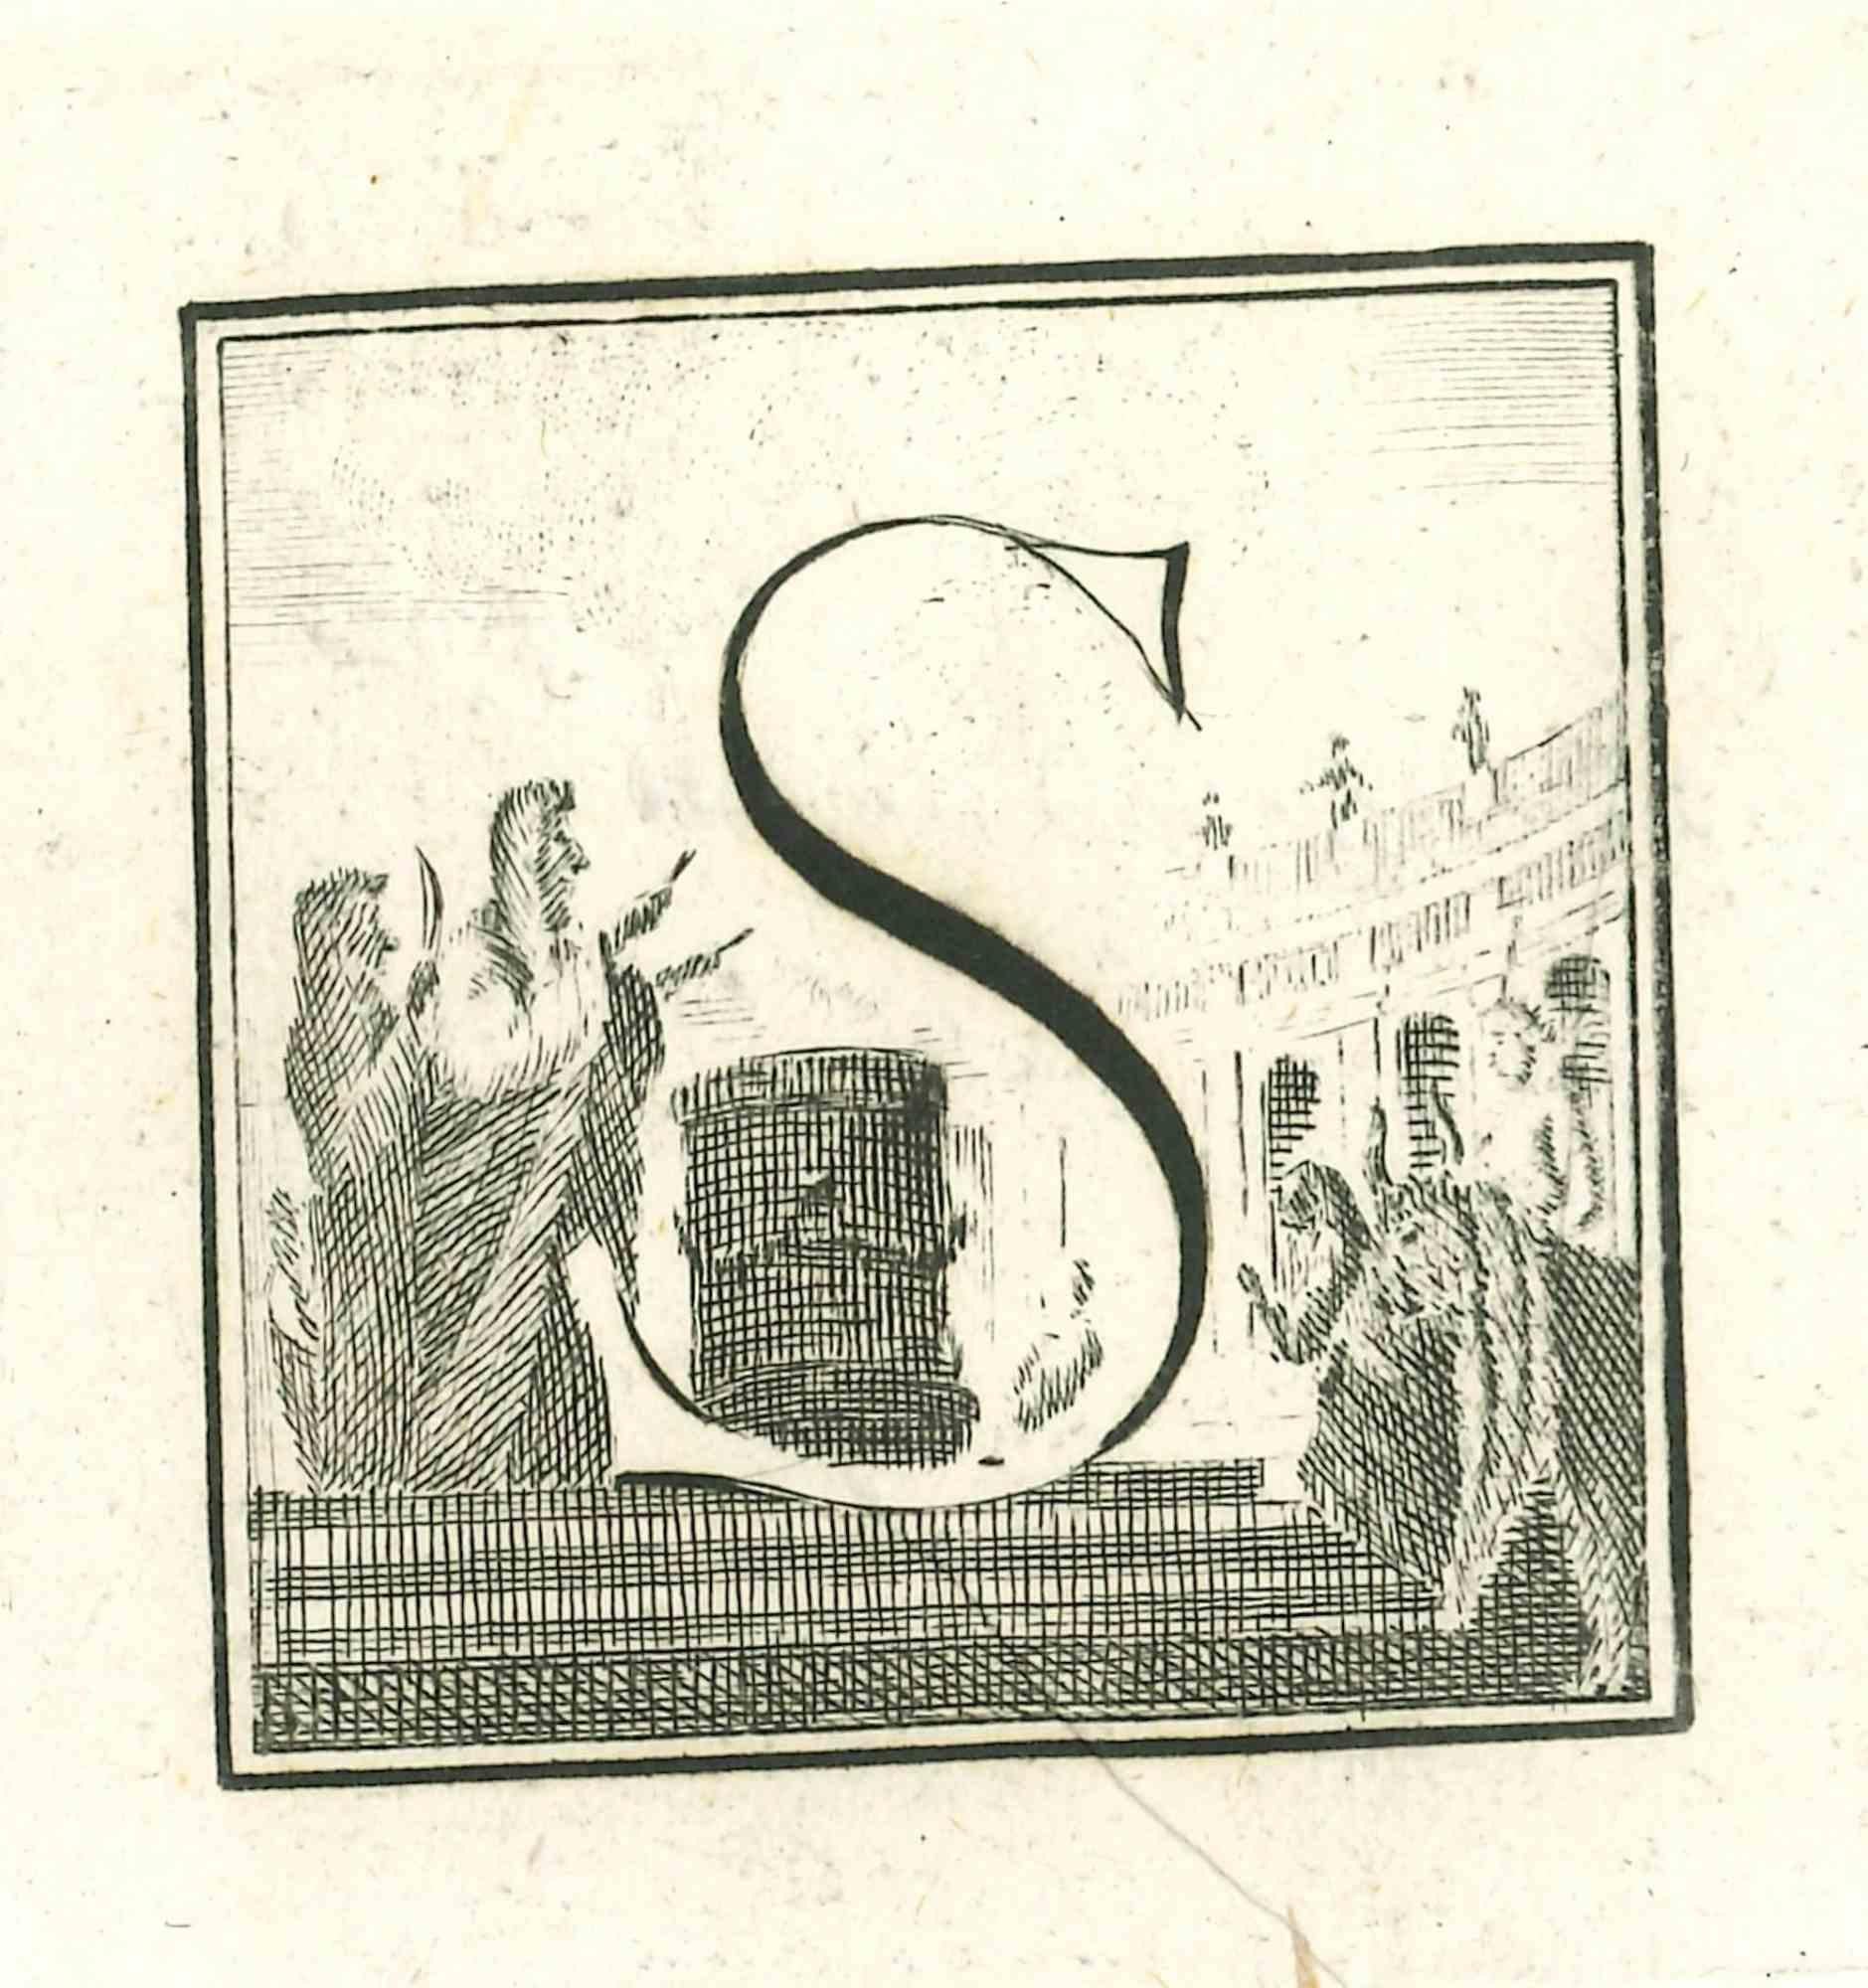 Unknown Figurative Print - Capital Letter S from the Antiquities of Herculaneum - Etching - 18th Century